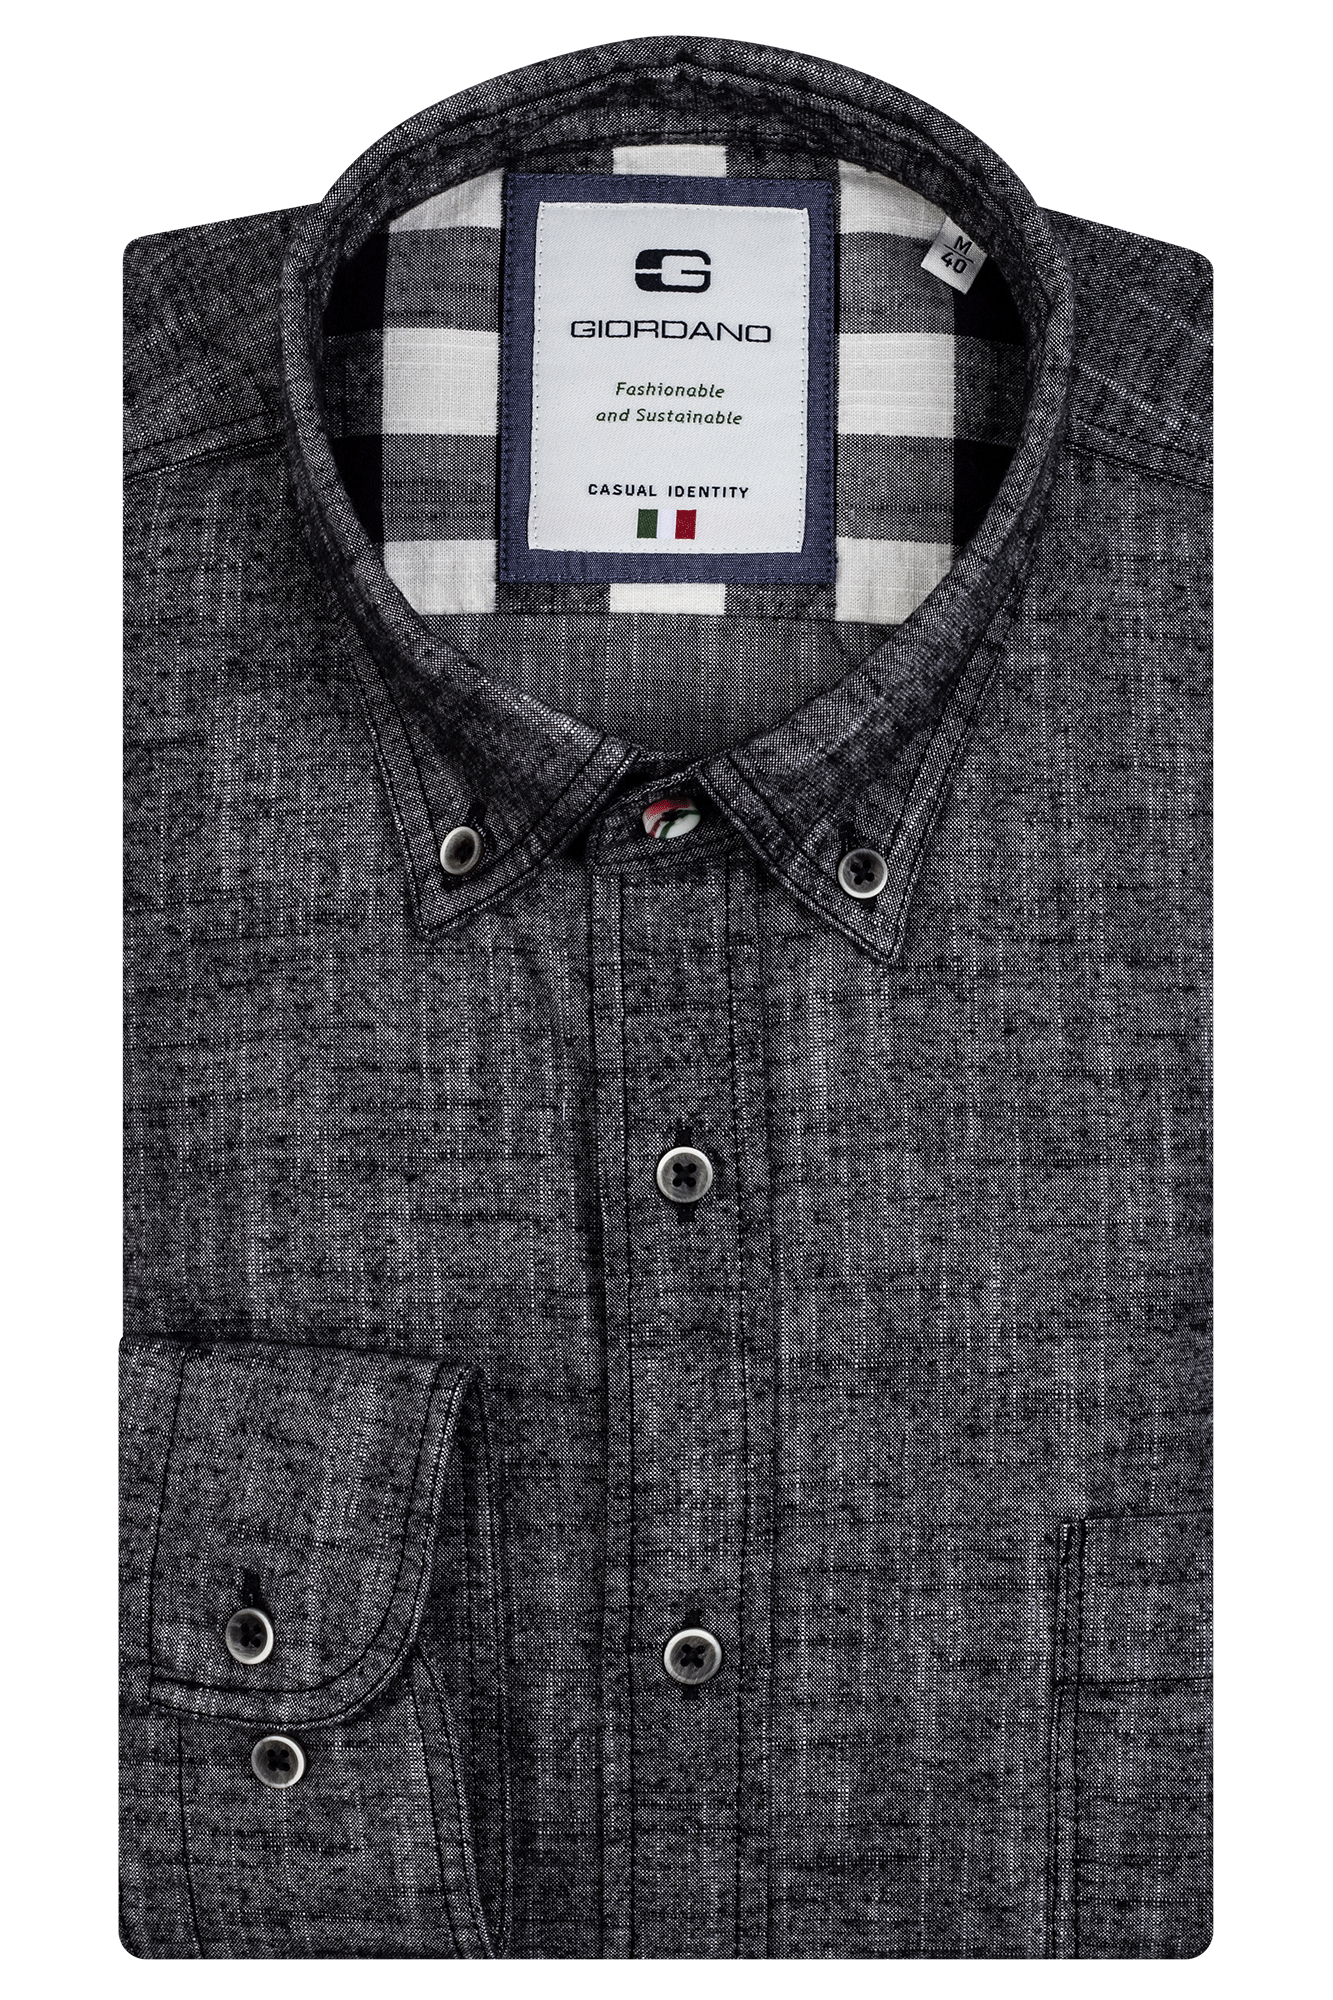 Charcoal button down by Giordano